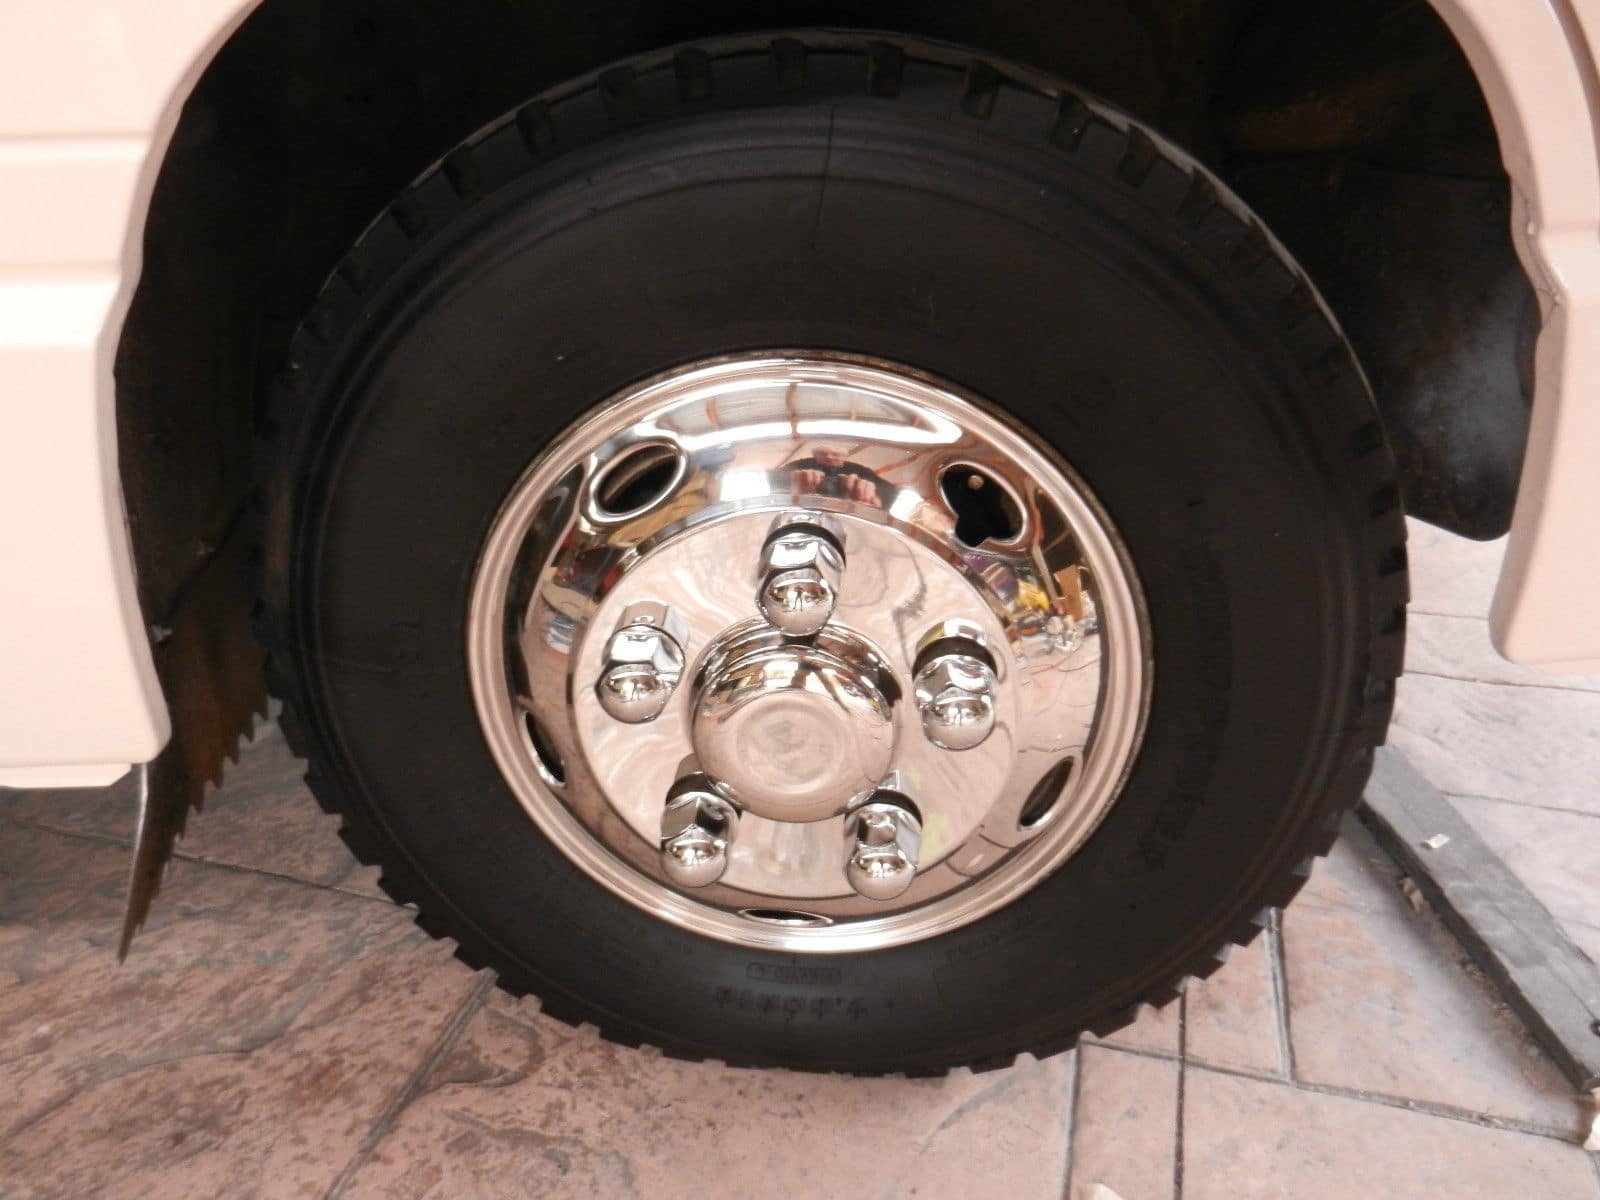 16 inch truck wheel covers